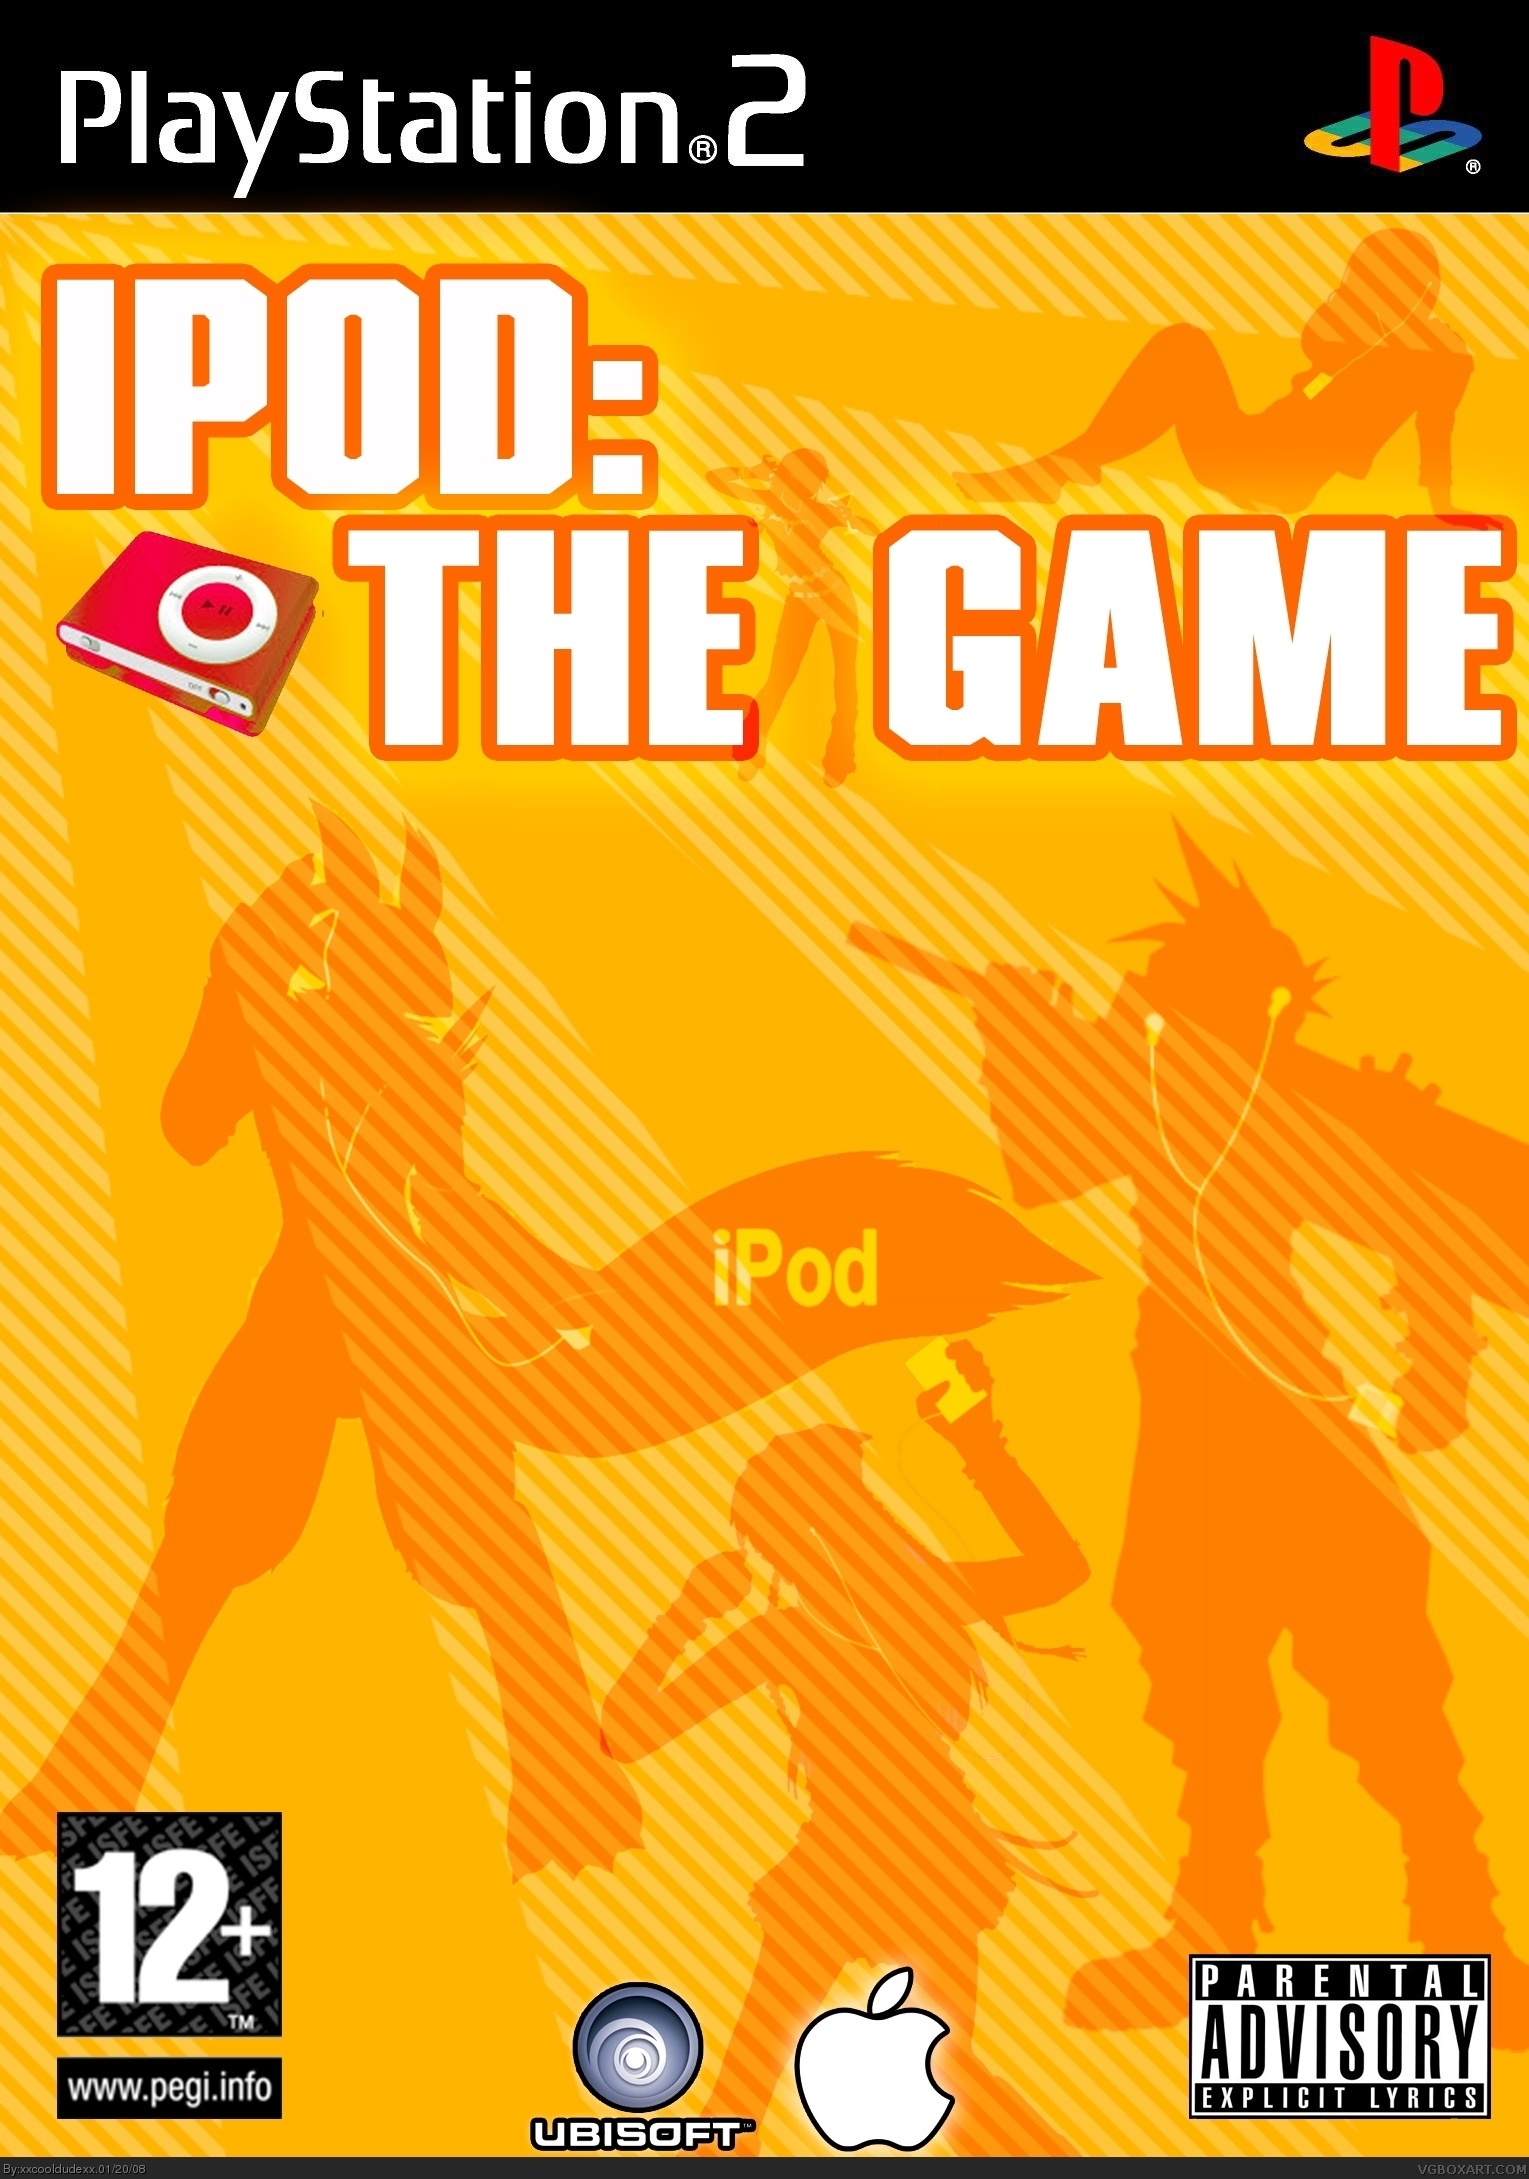 download the new version for ipod GameMaker